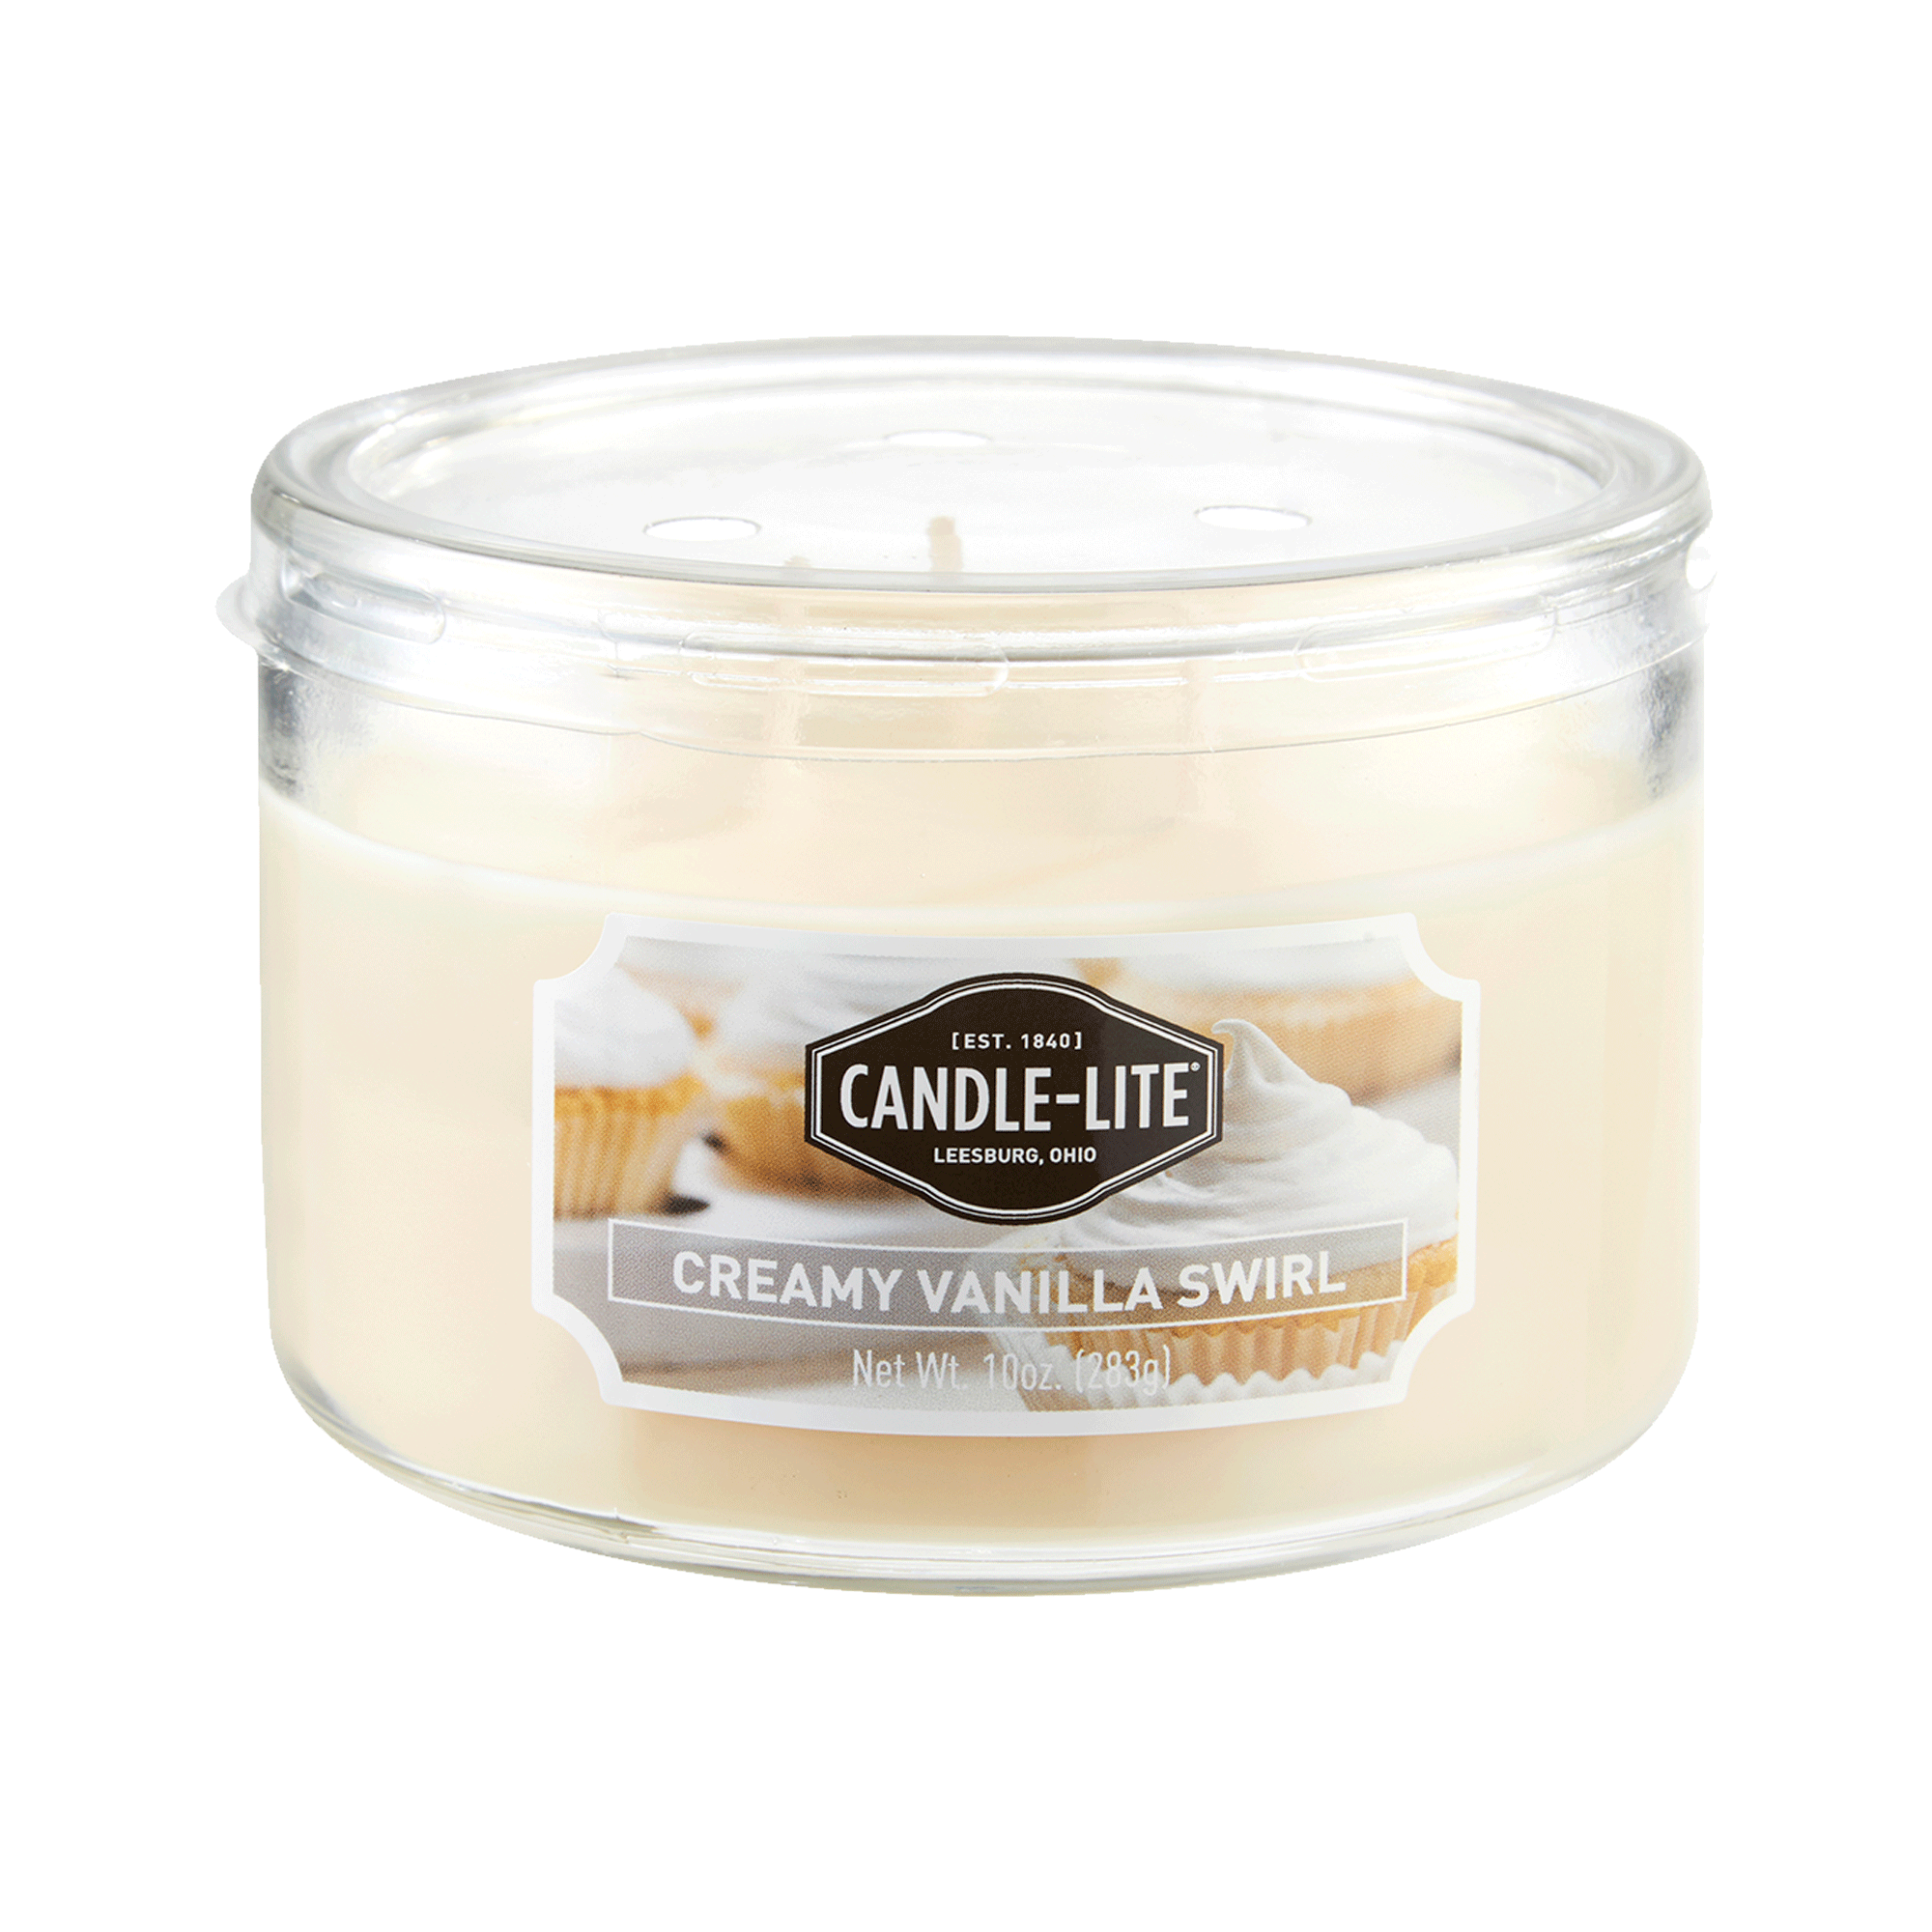 Candle-Lite Red an Cream All-American Scent Wax Melt Blends 9.25